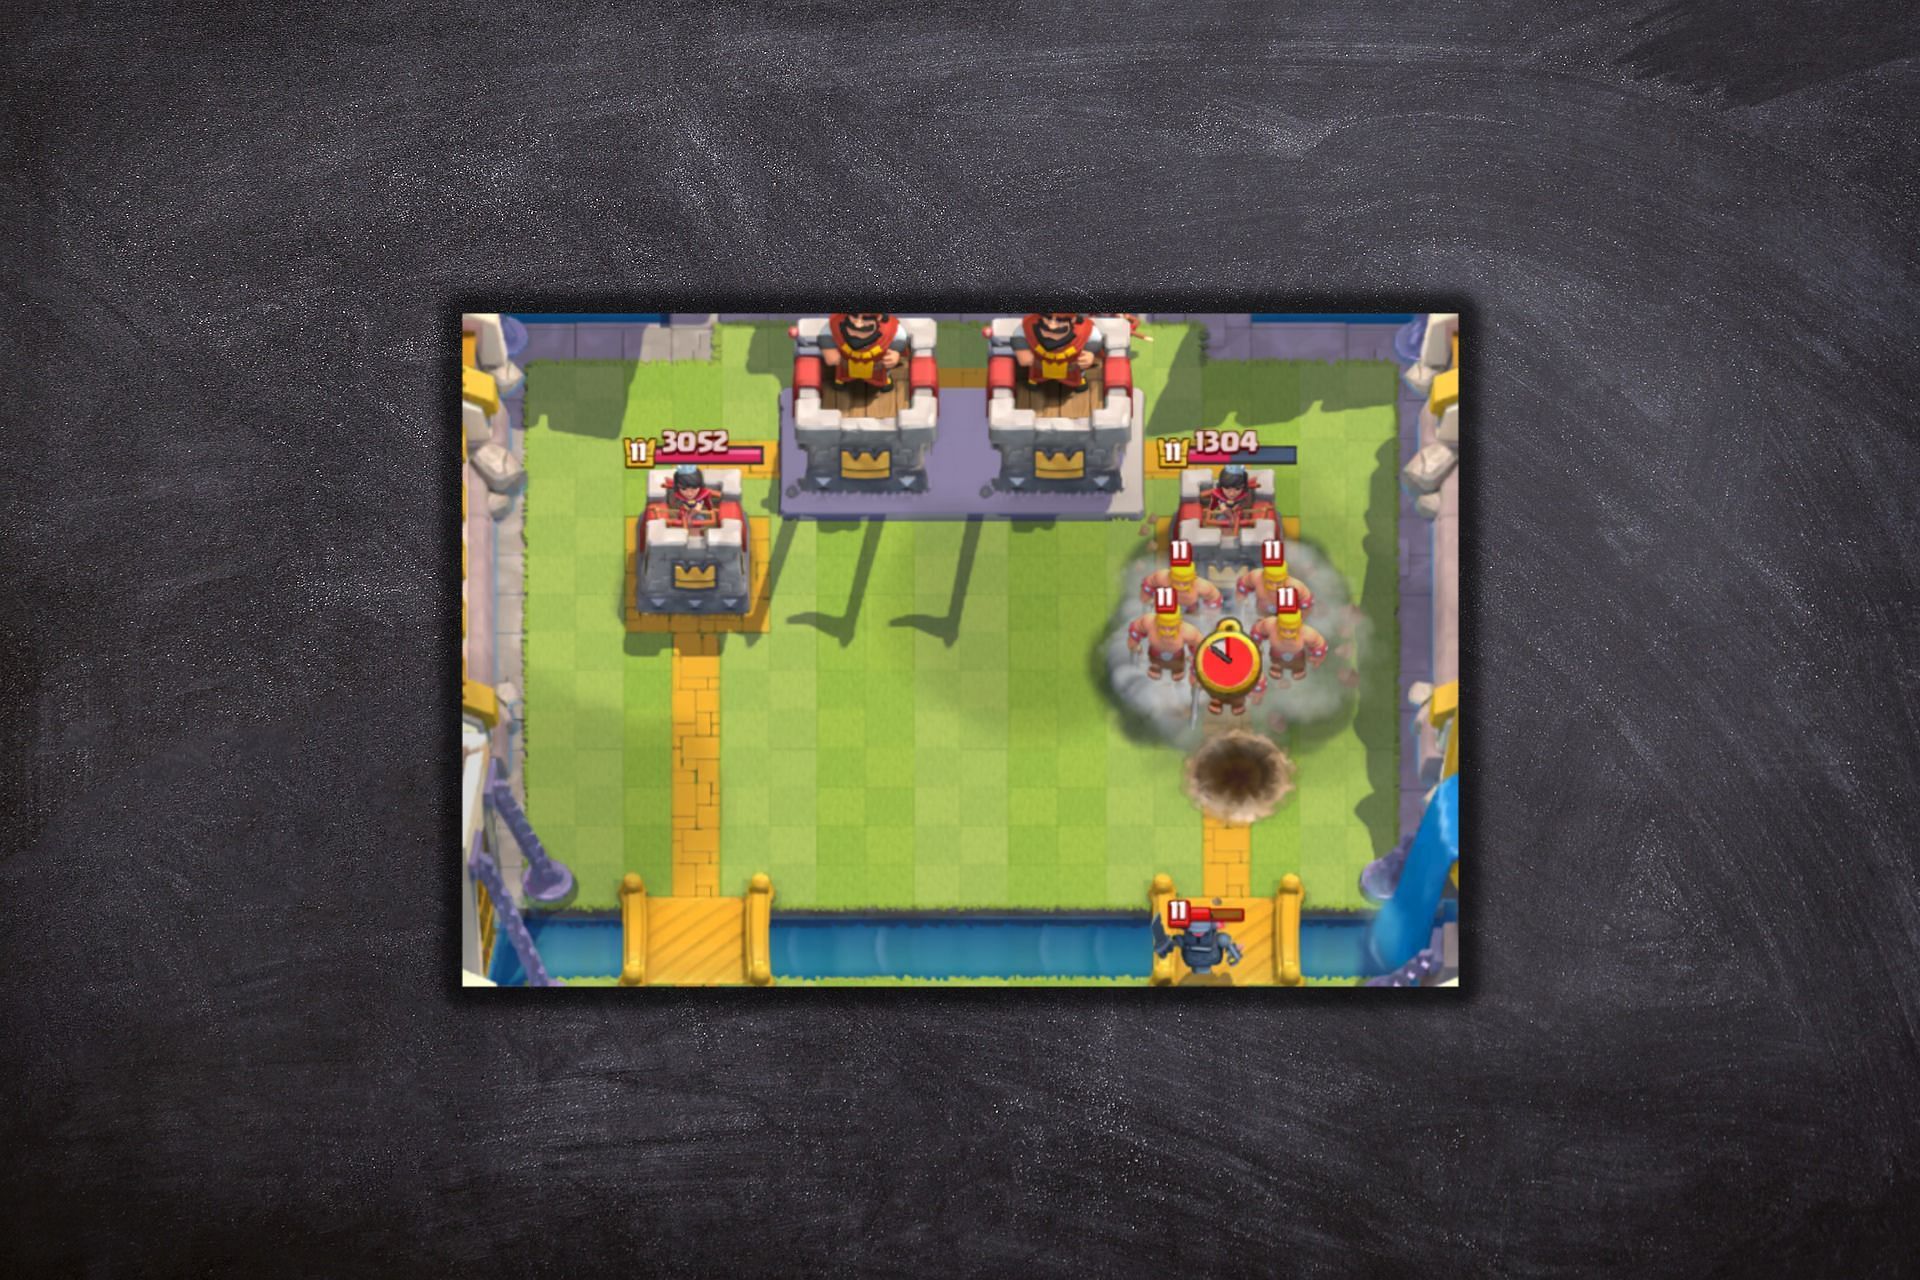 Counter-attacking in the game (Image via Supercell)